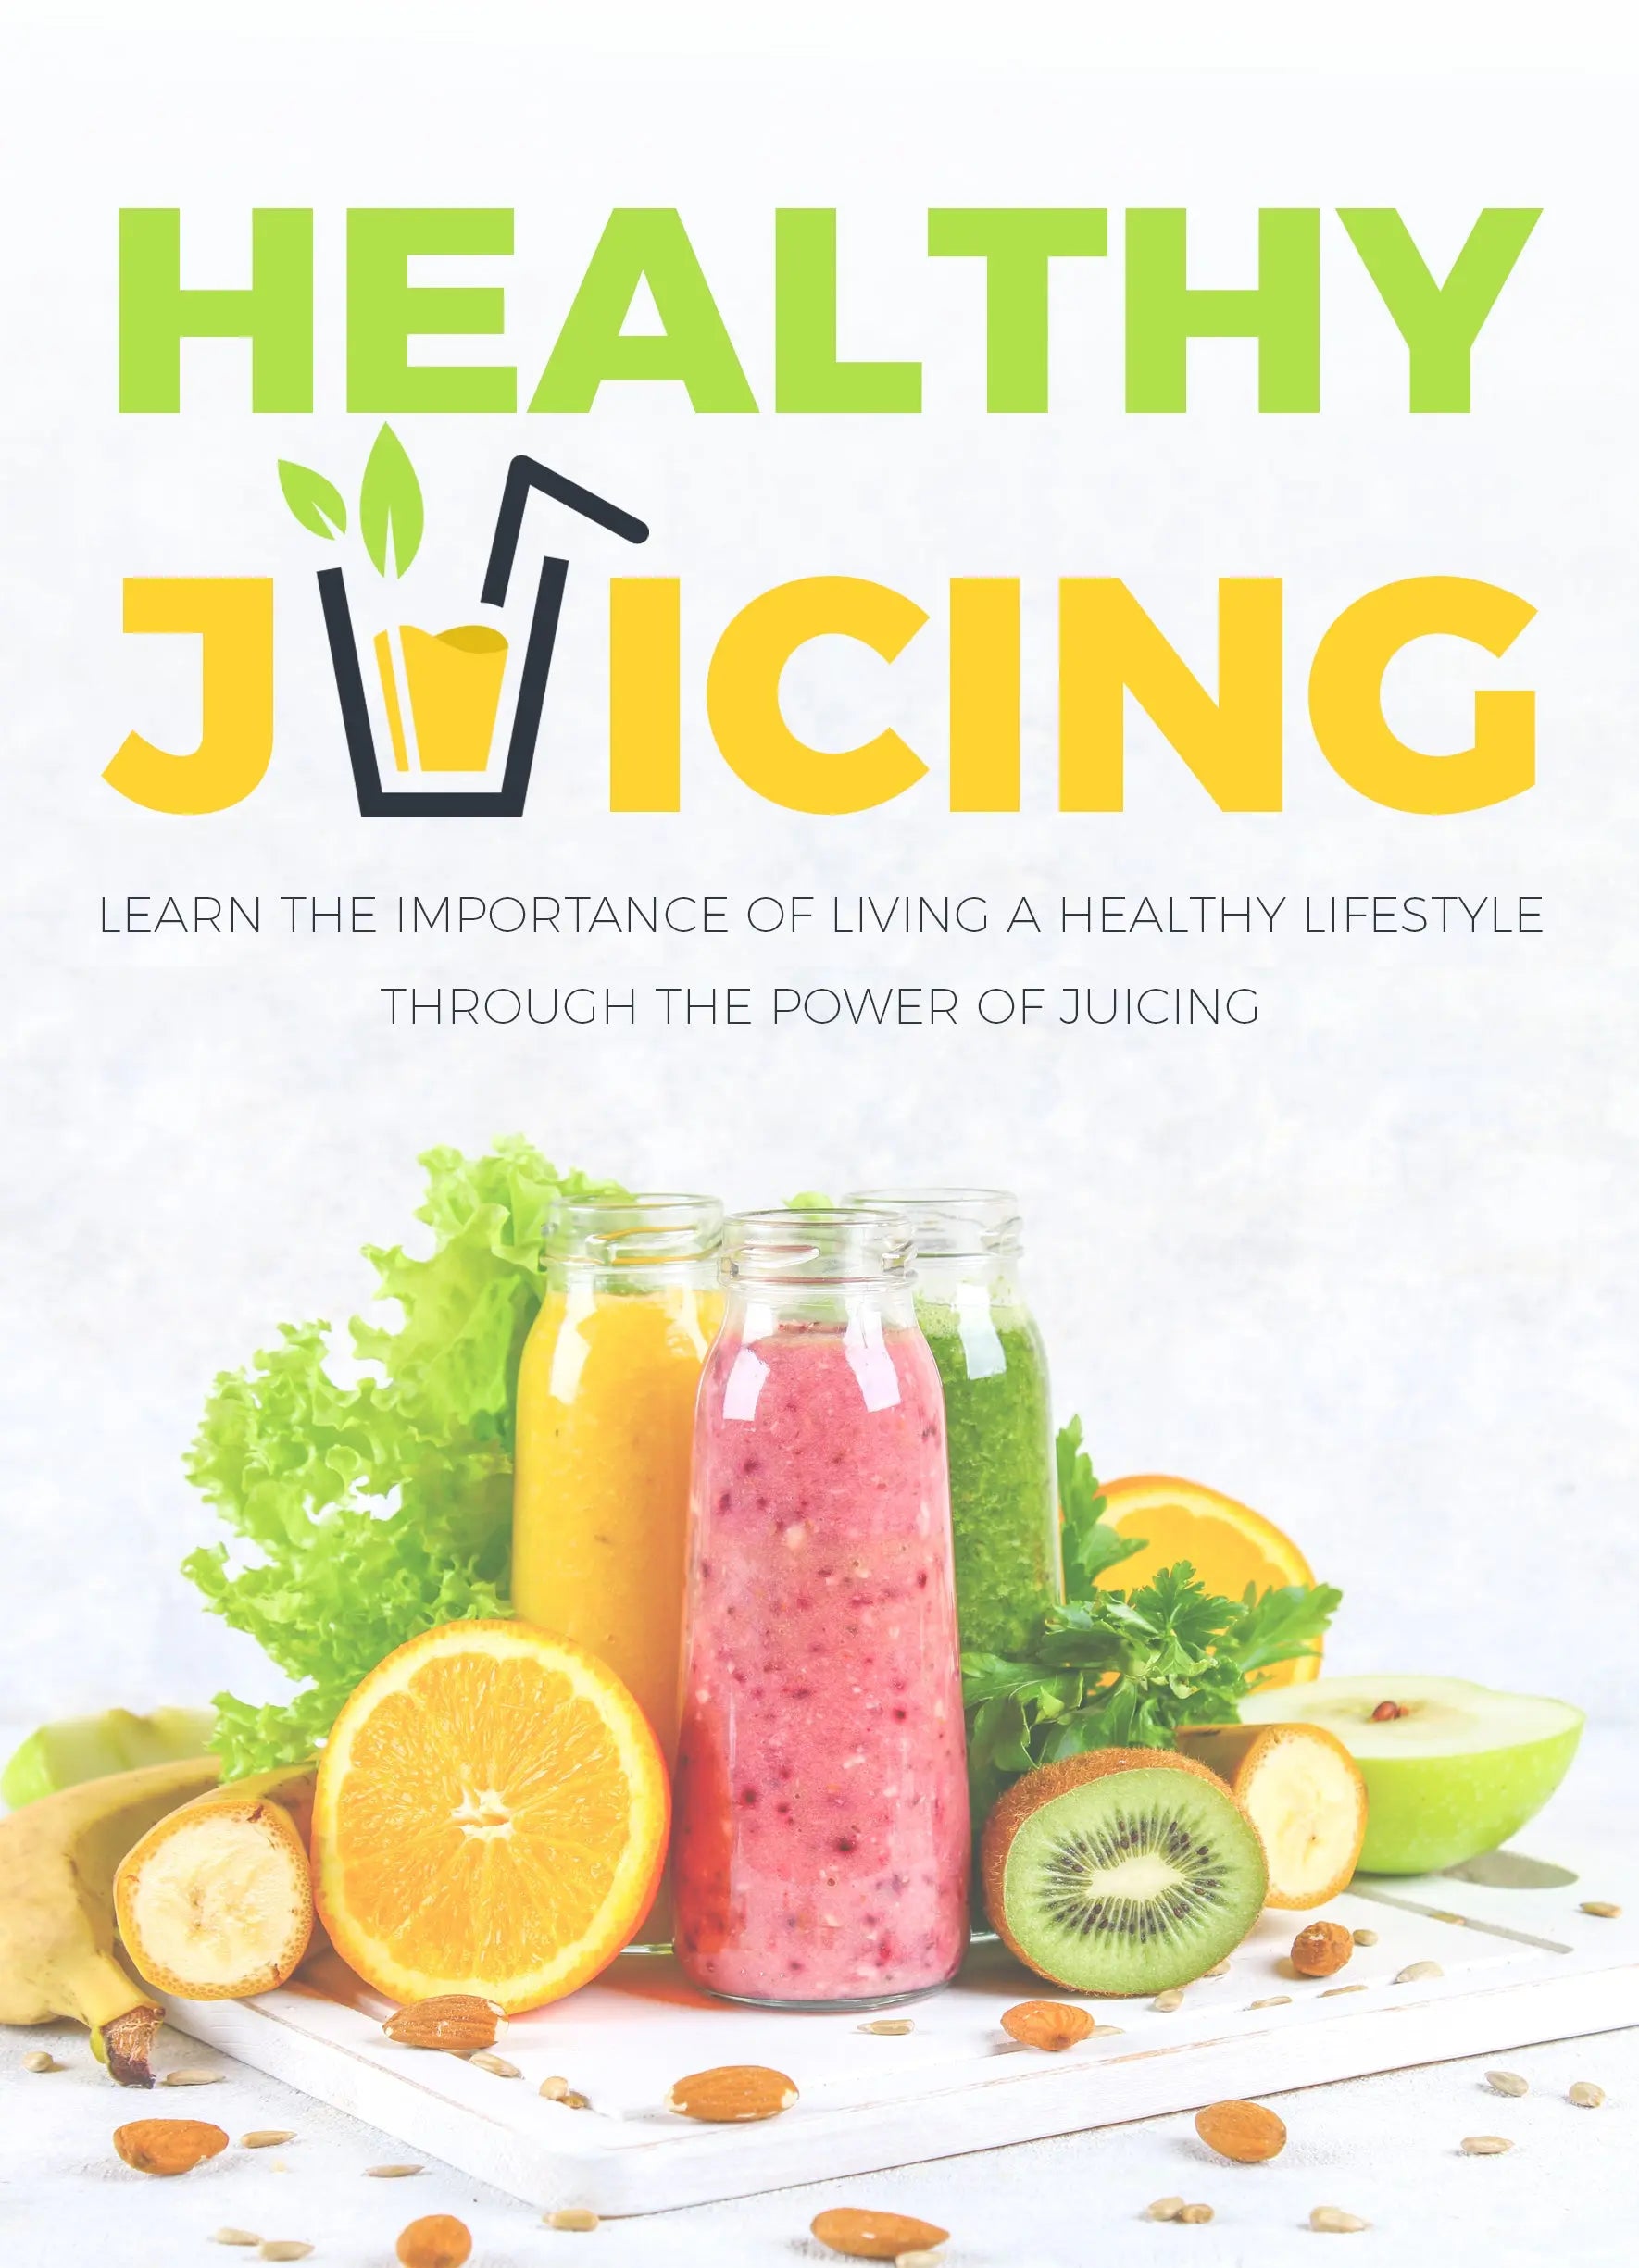 Healthy Juicing, Living a Healthy Lifestyle Through Juicing